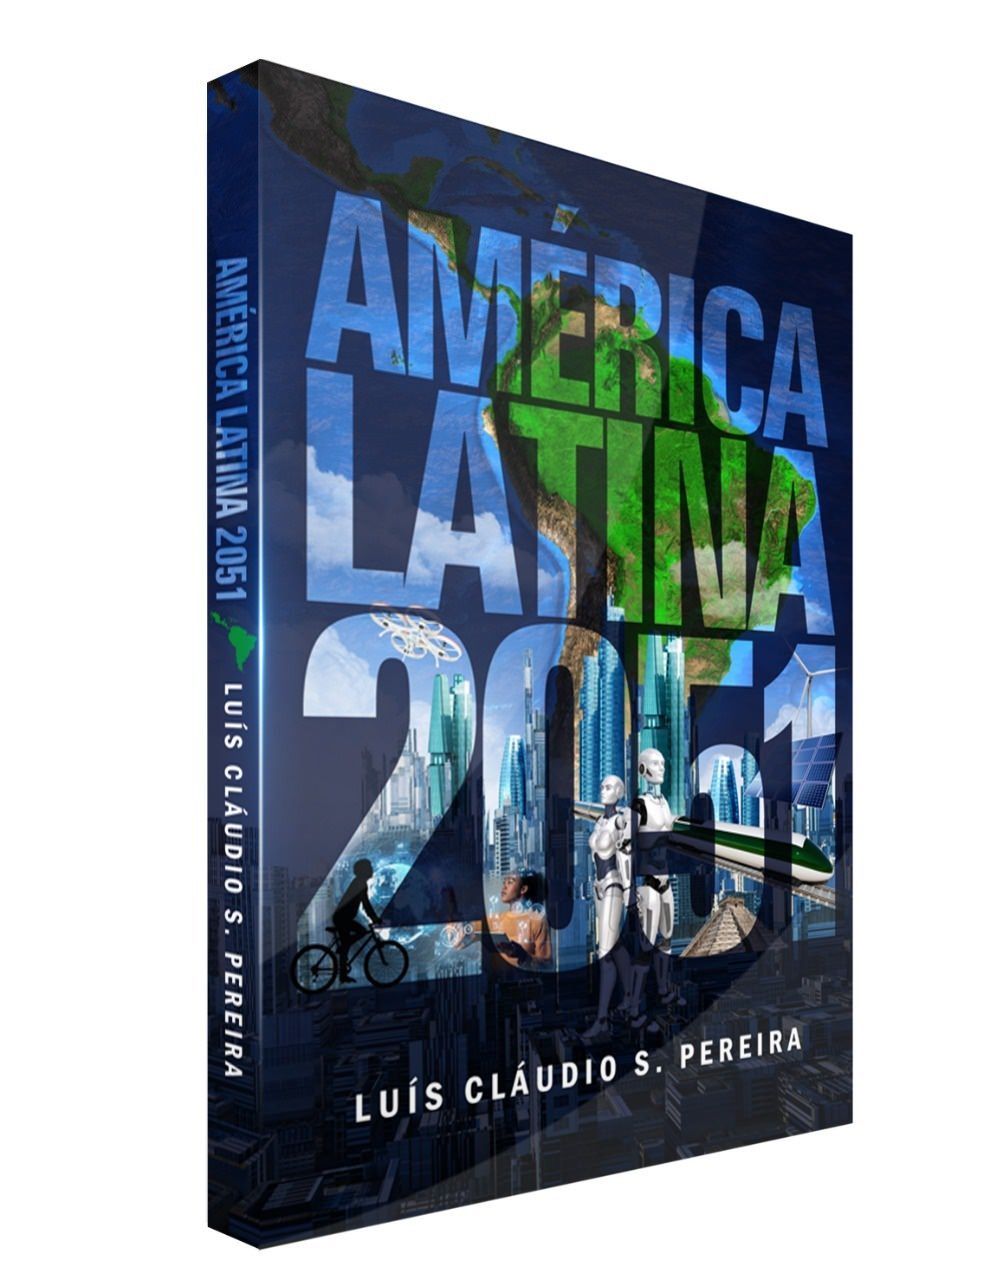 Book "Latin America 2051" by Luís Cláudio S. Pear, cover. Disclosure.